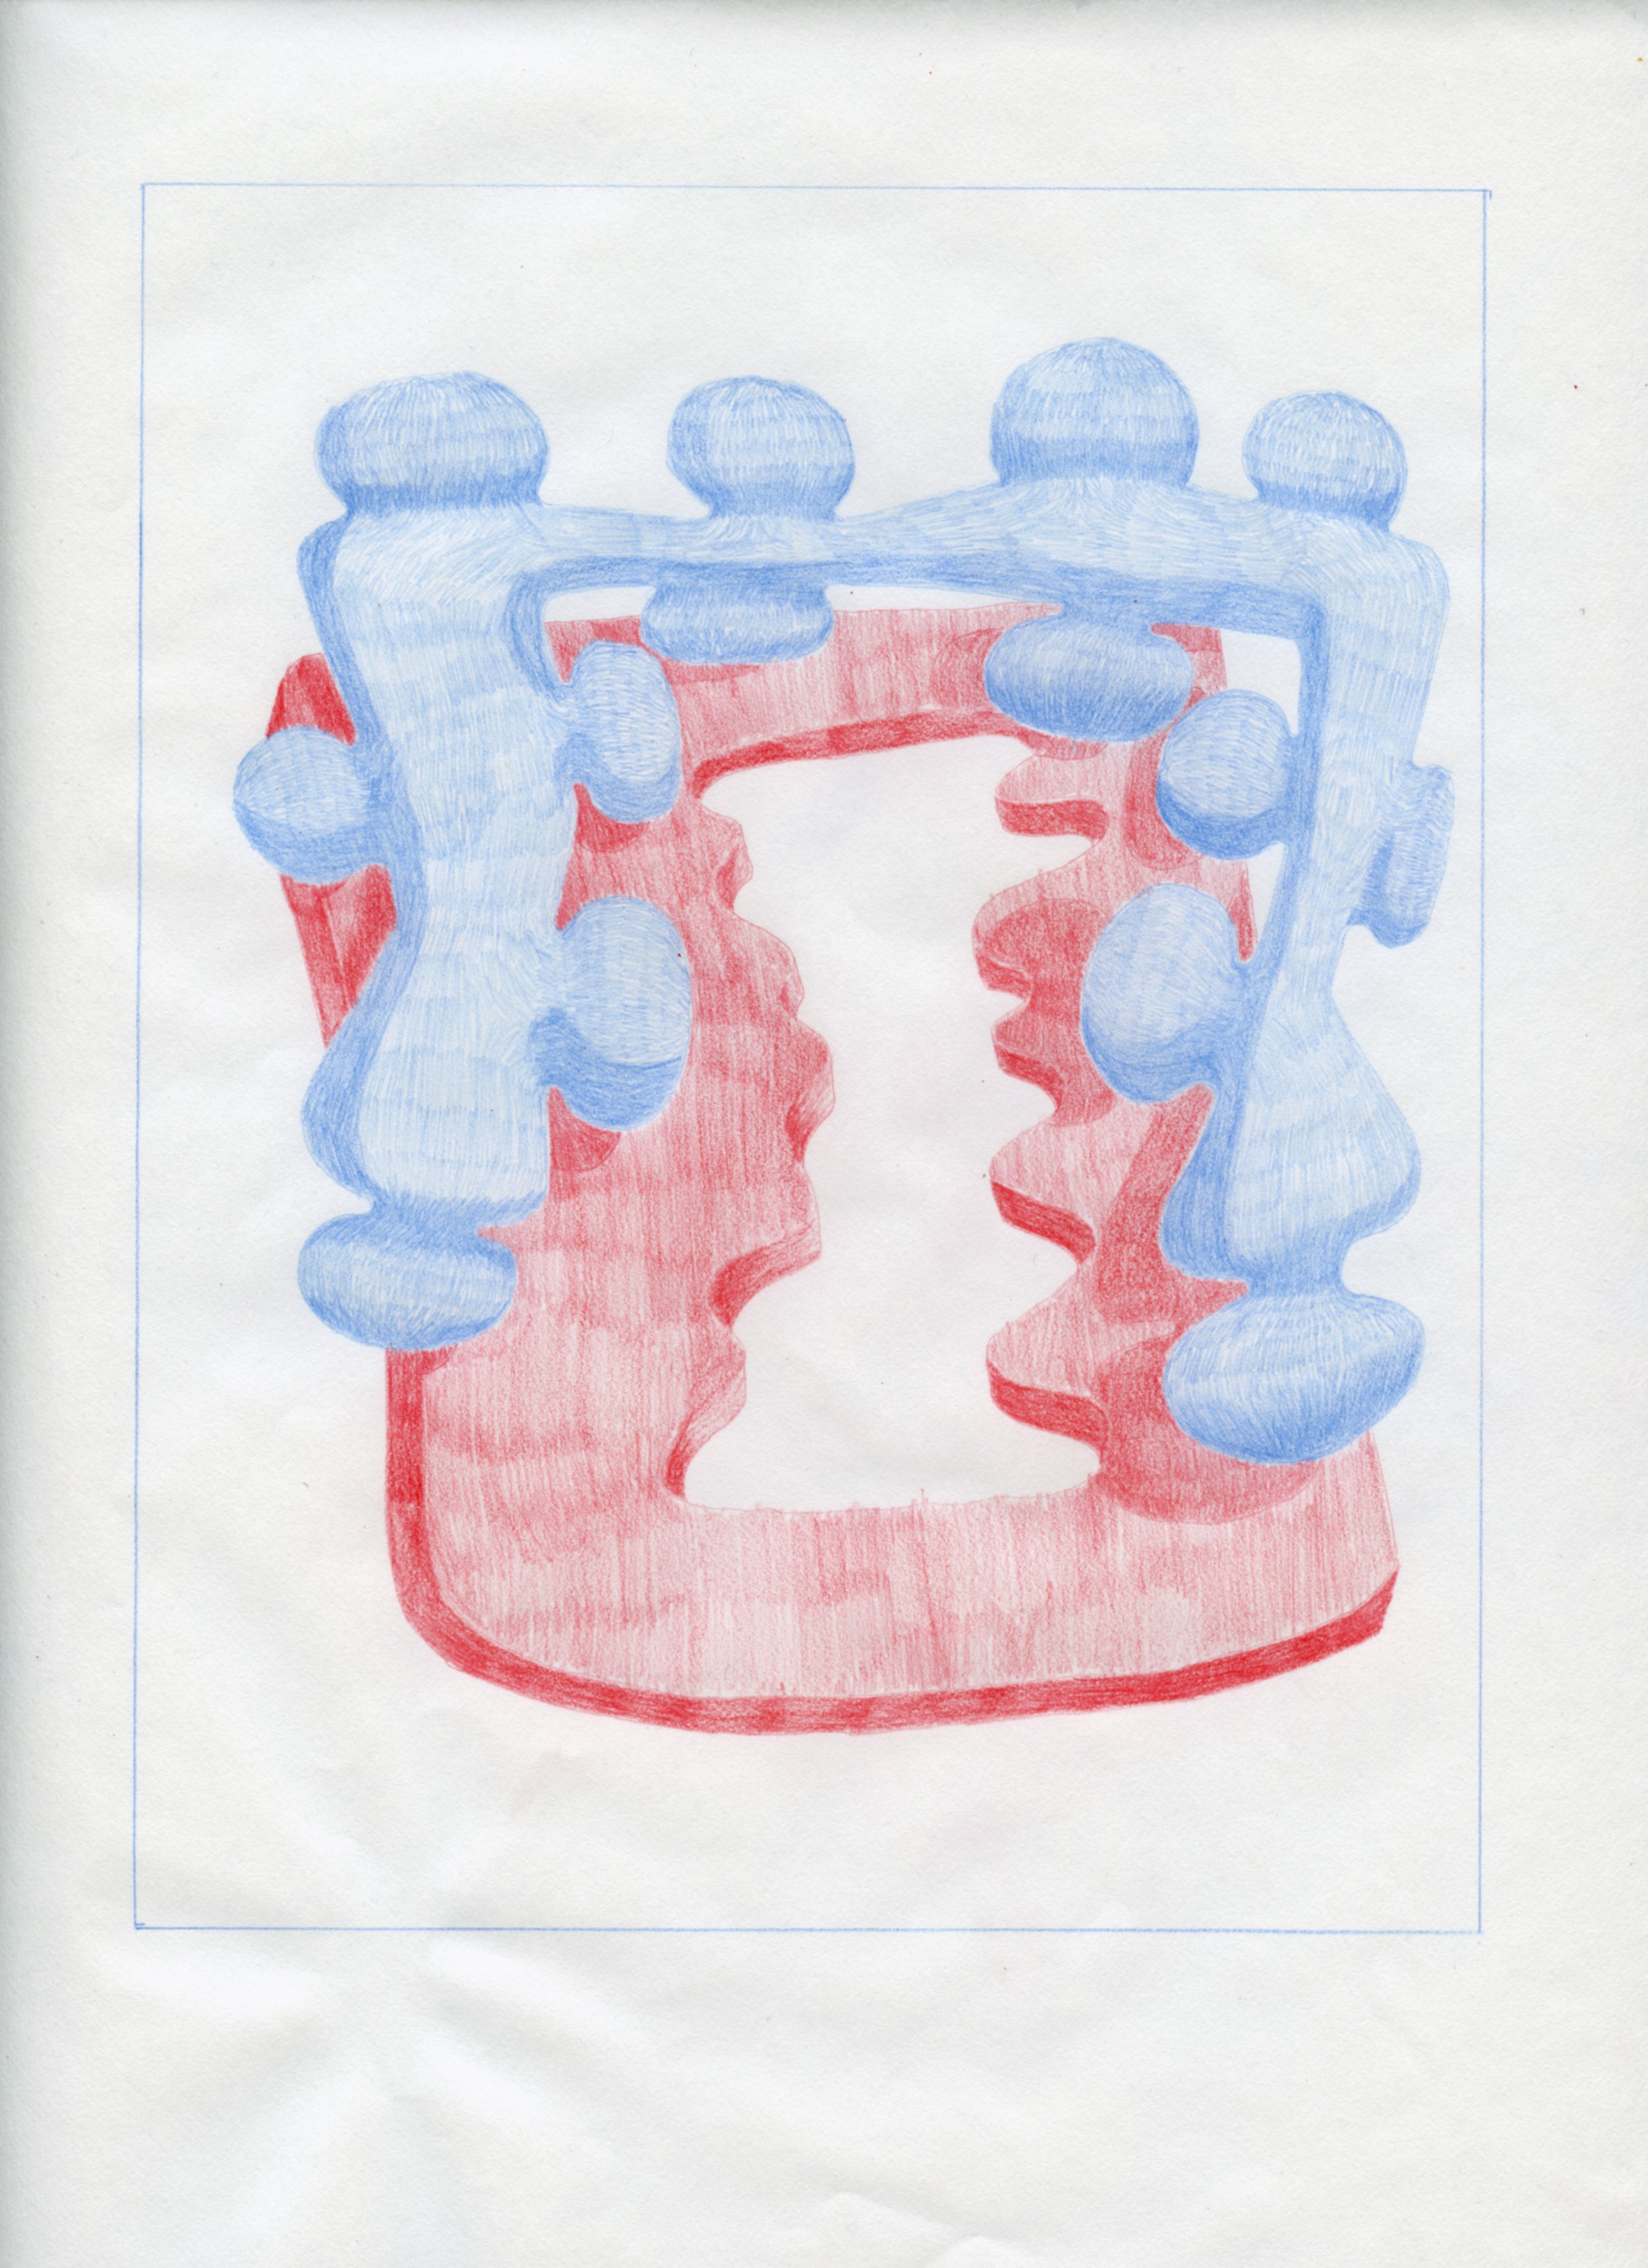  Workplace Drawing #46, 2021, Red and Blue Graphite on Bond Paper, 9”x 12”. 